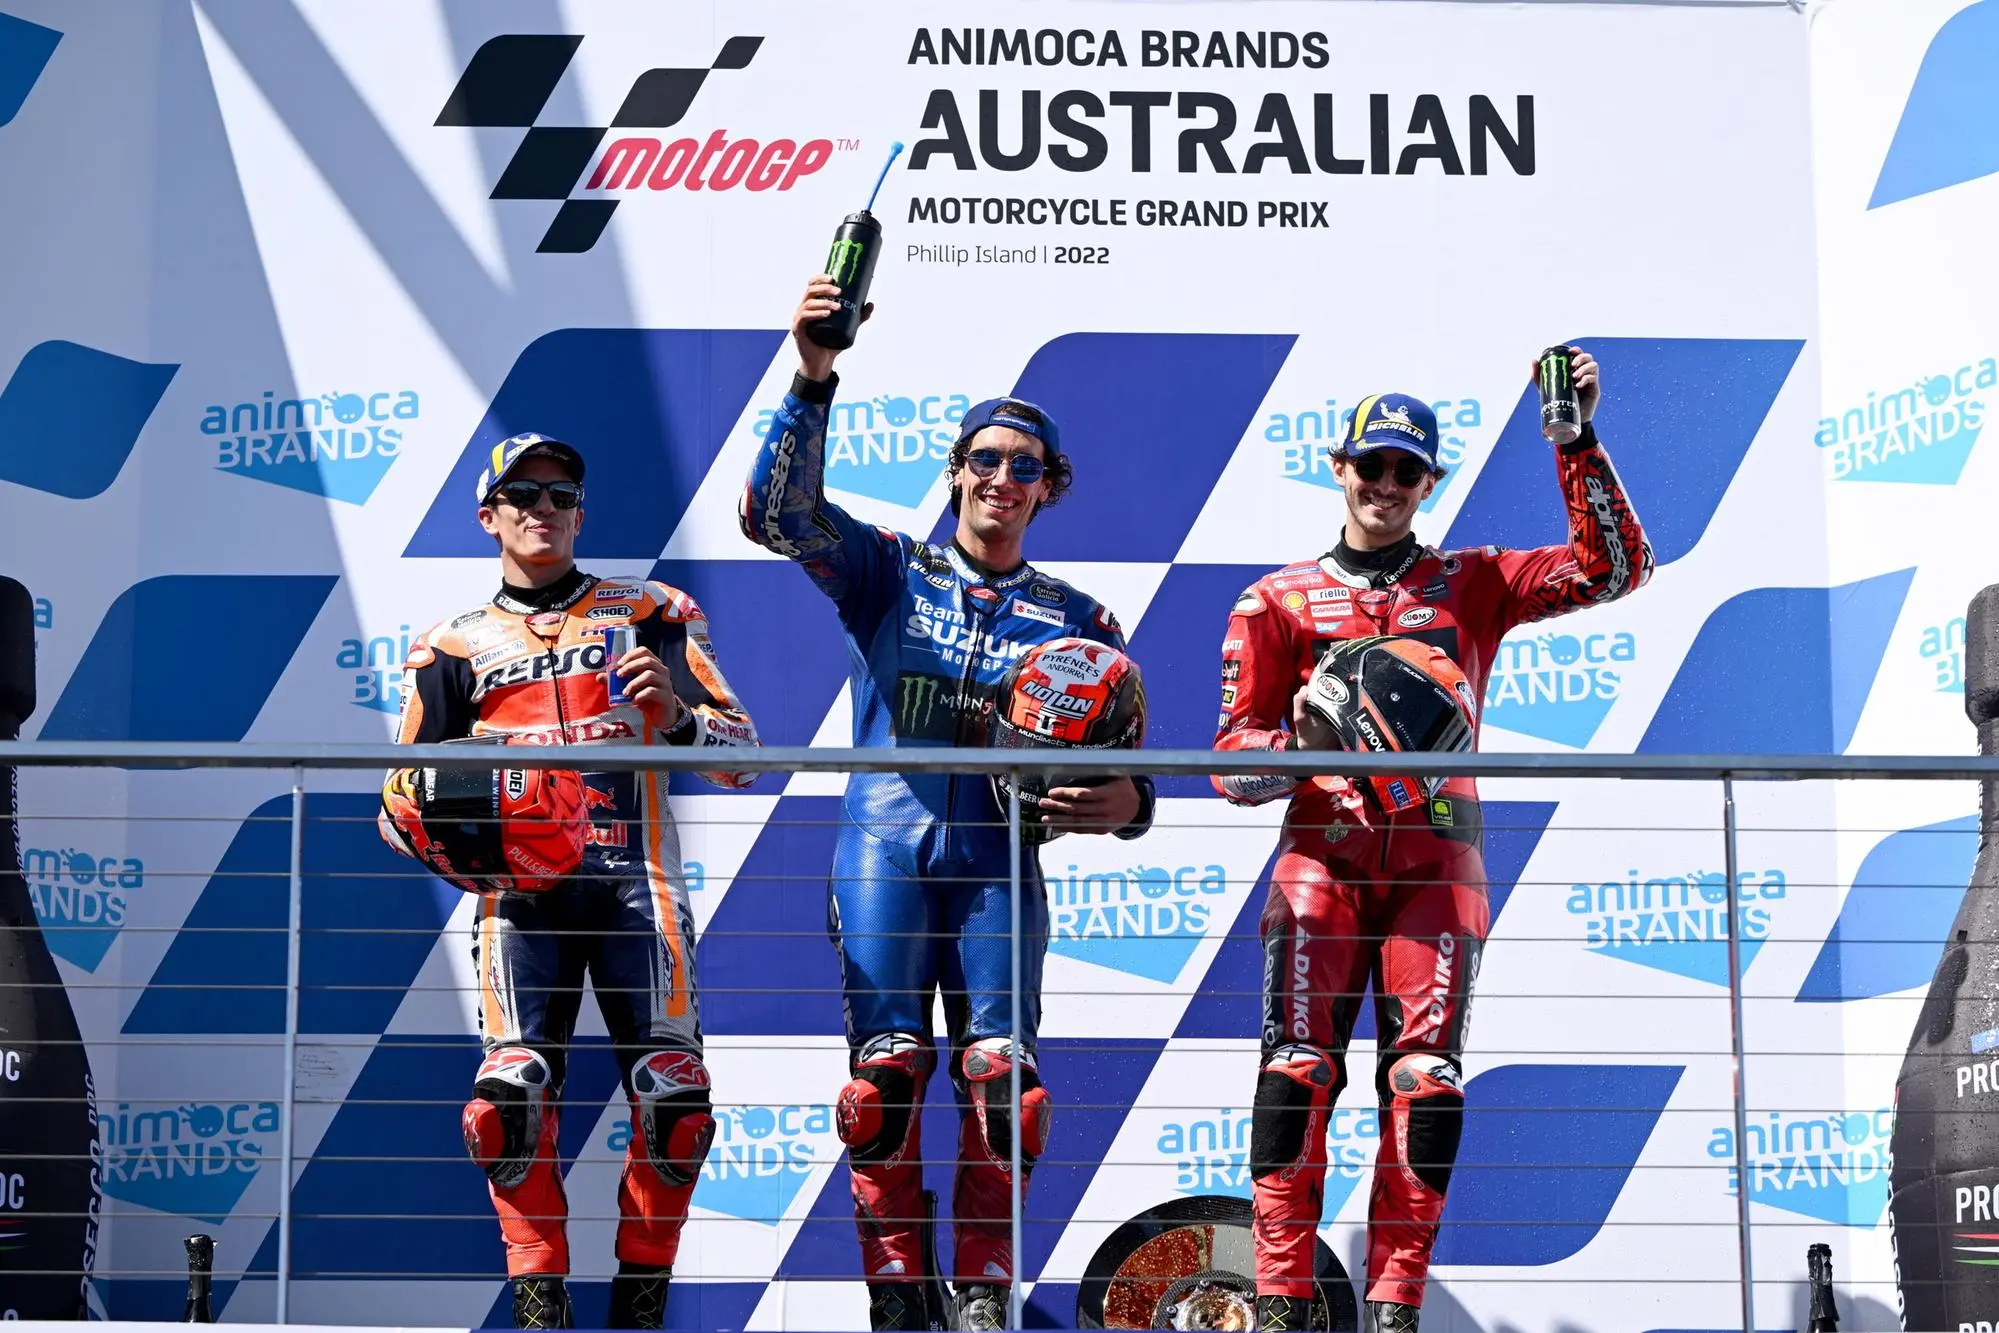 epa10246444 First place Alex Rins of Spain riding for Suzuki Ecstar (C) celebrates on the podium with second place Marc Marquez of Spain riding for Repsol Honda Team (L) and third place Francesco Bagnaia of Italy riding for Ducati Lenovo Team (R) after the MotoGP race race at the Australian Motorcycle Grand Prix at the Phillip Island Grand Prix Circuit on Phillip Island, Victoria, Australia, 16 October 2022. EPA/JOEL CARRETT AUSTRALIA AND NEW ZEALAND OUT